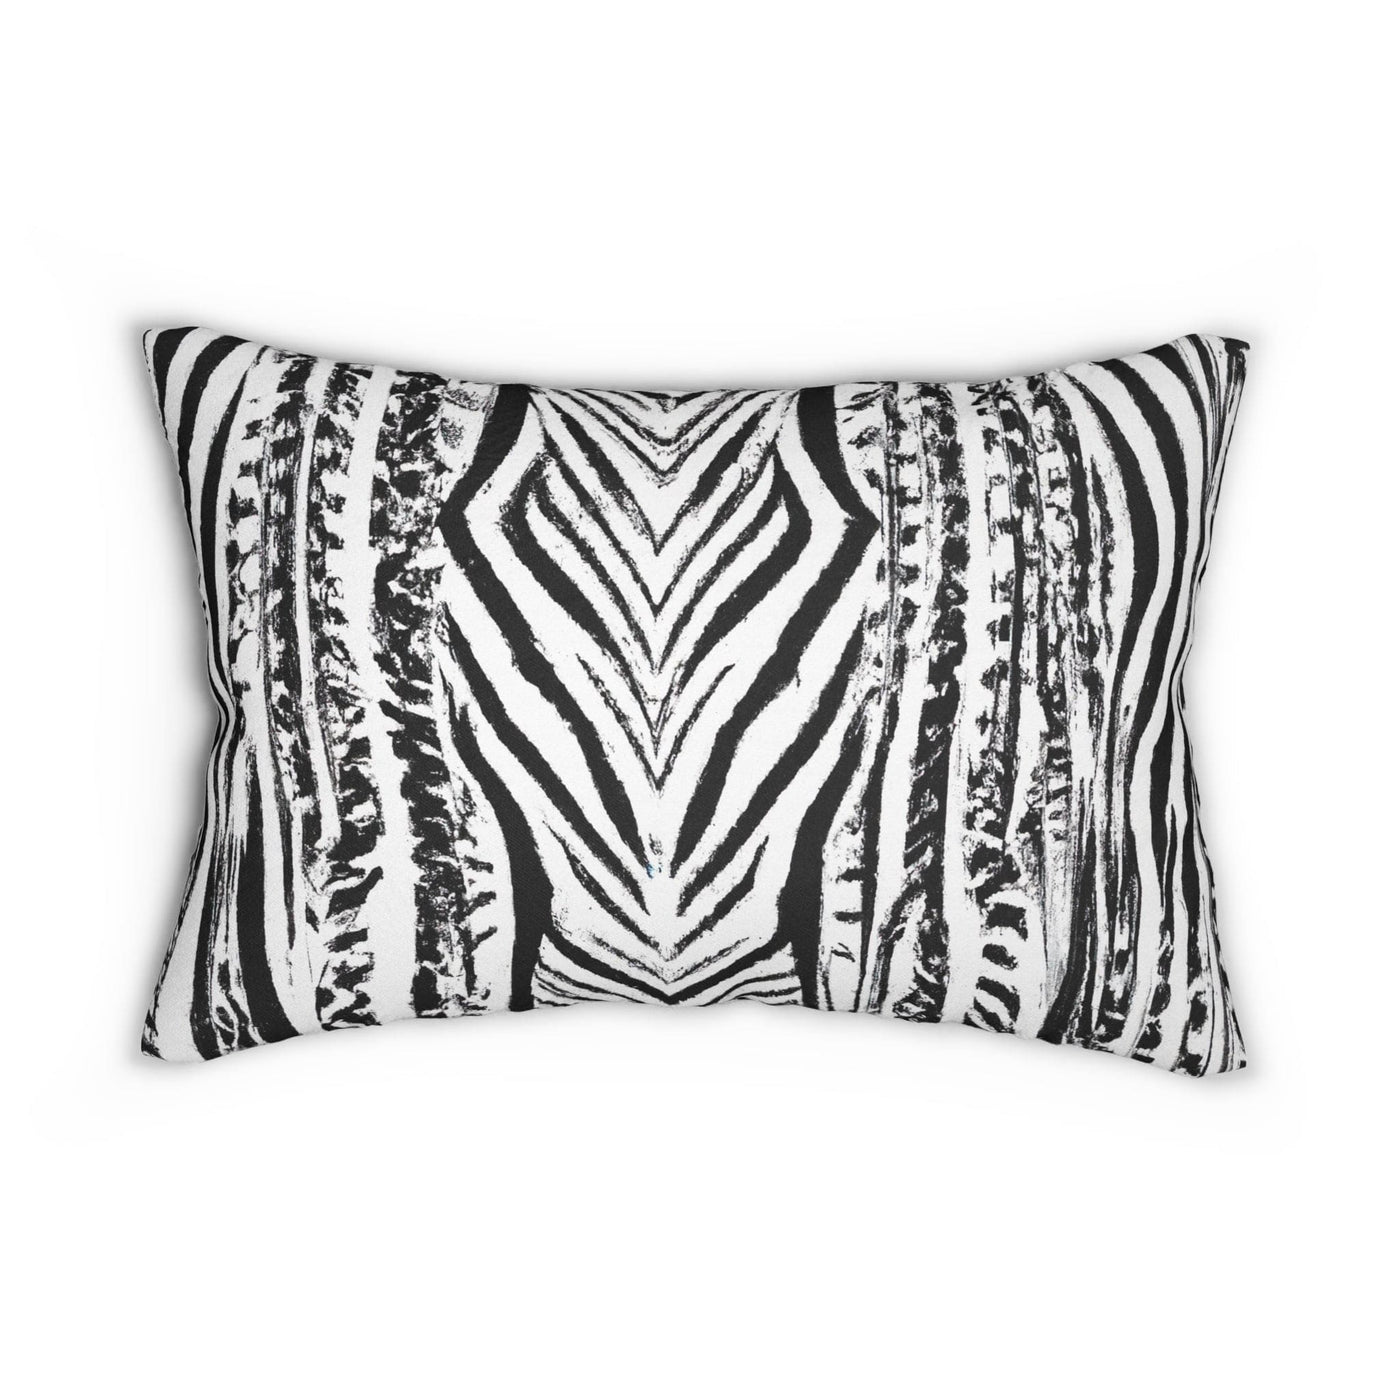 Decorative Lumbar Throw Pillow - Native Black And White Abstract Pattern - Home